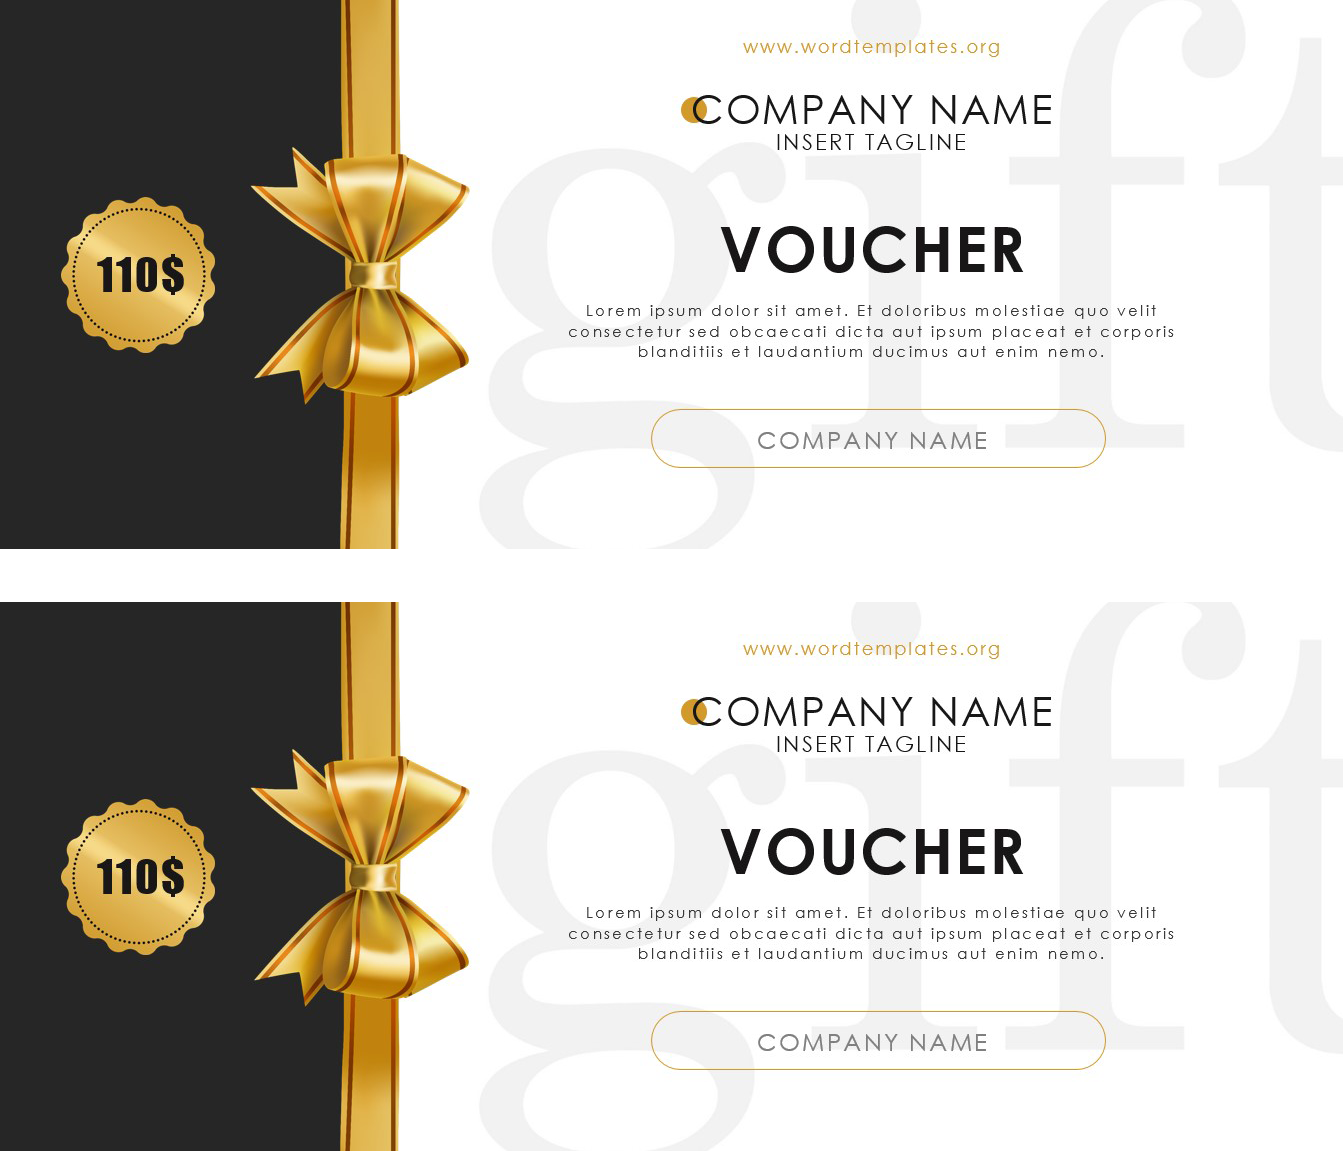 Free Gift Certificate Templates - Word Templates for Free Download